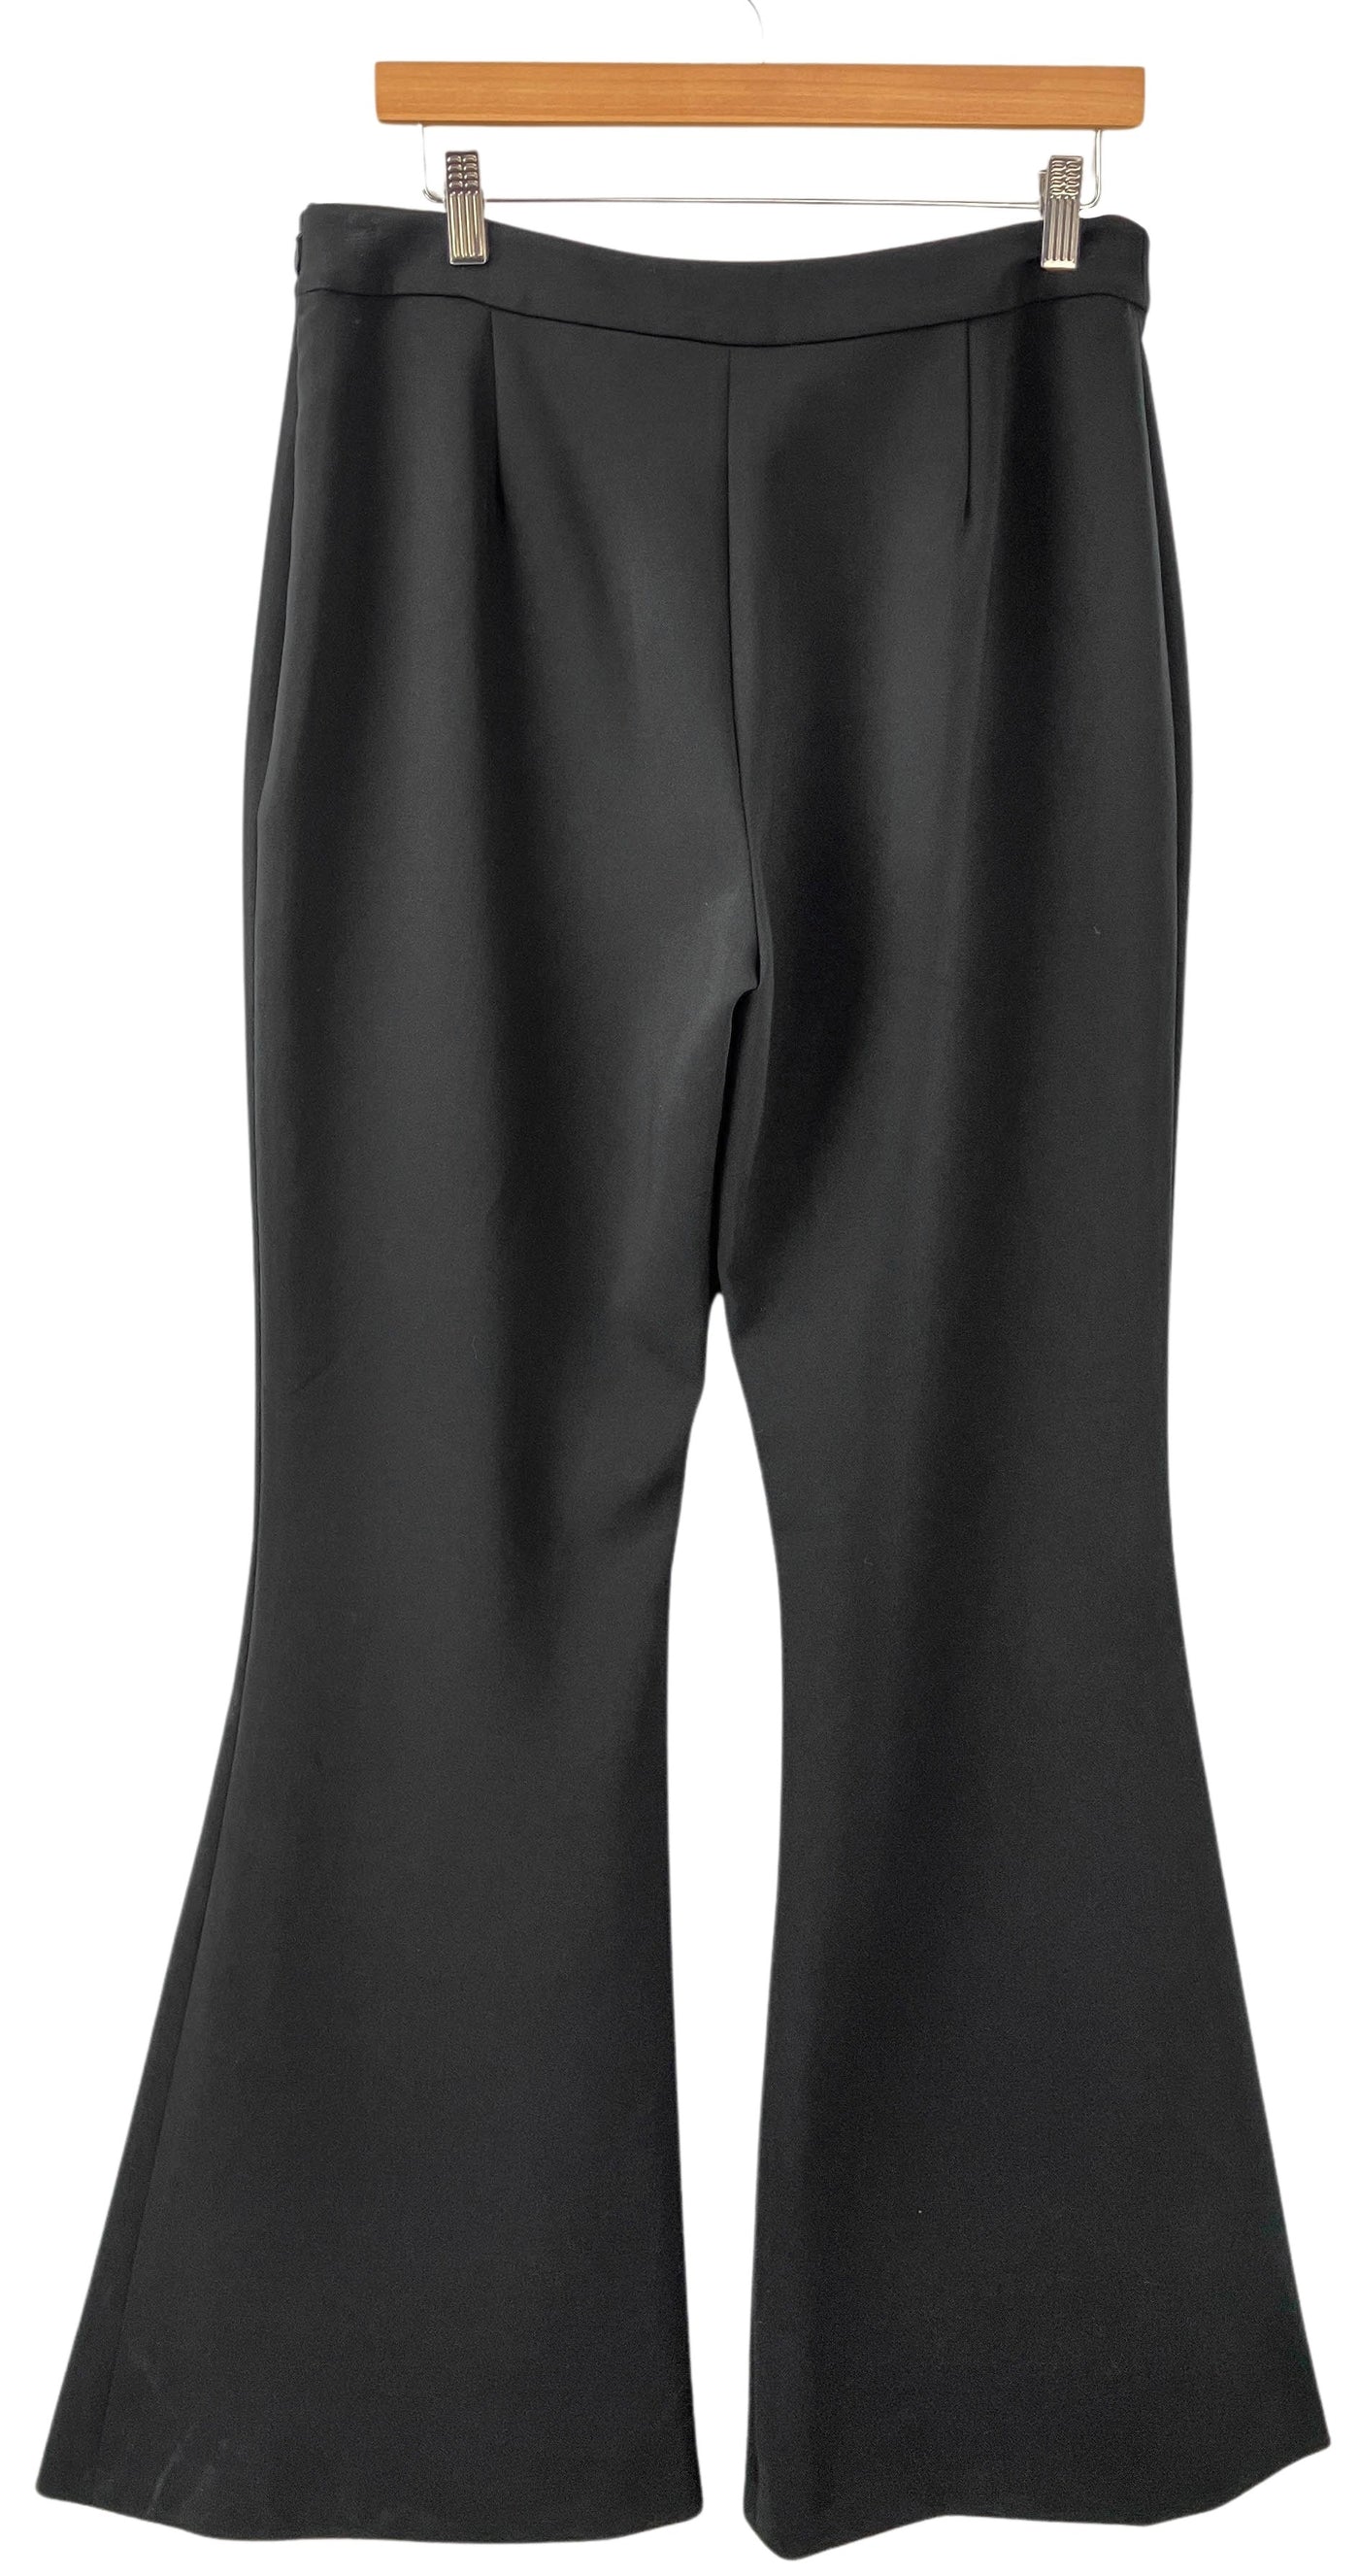 Brandon Maxwell Flared Trouser in Black - Discounts on Brandon Maxwell at UAL